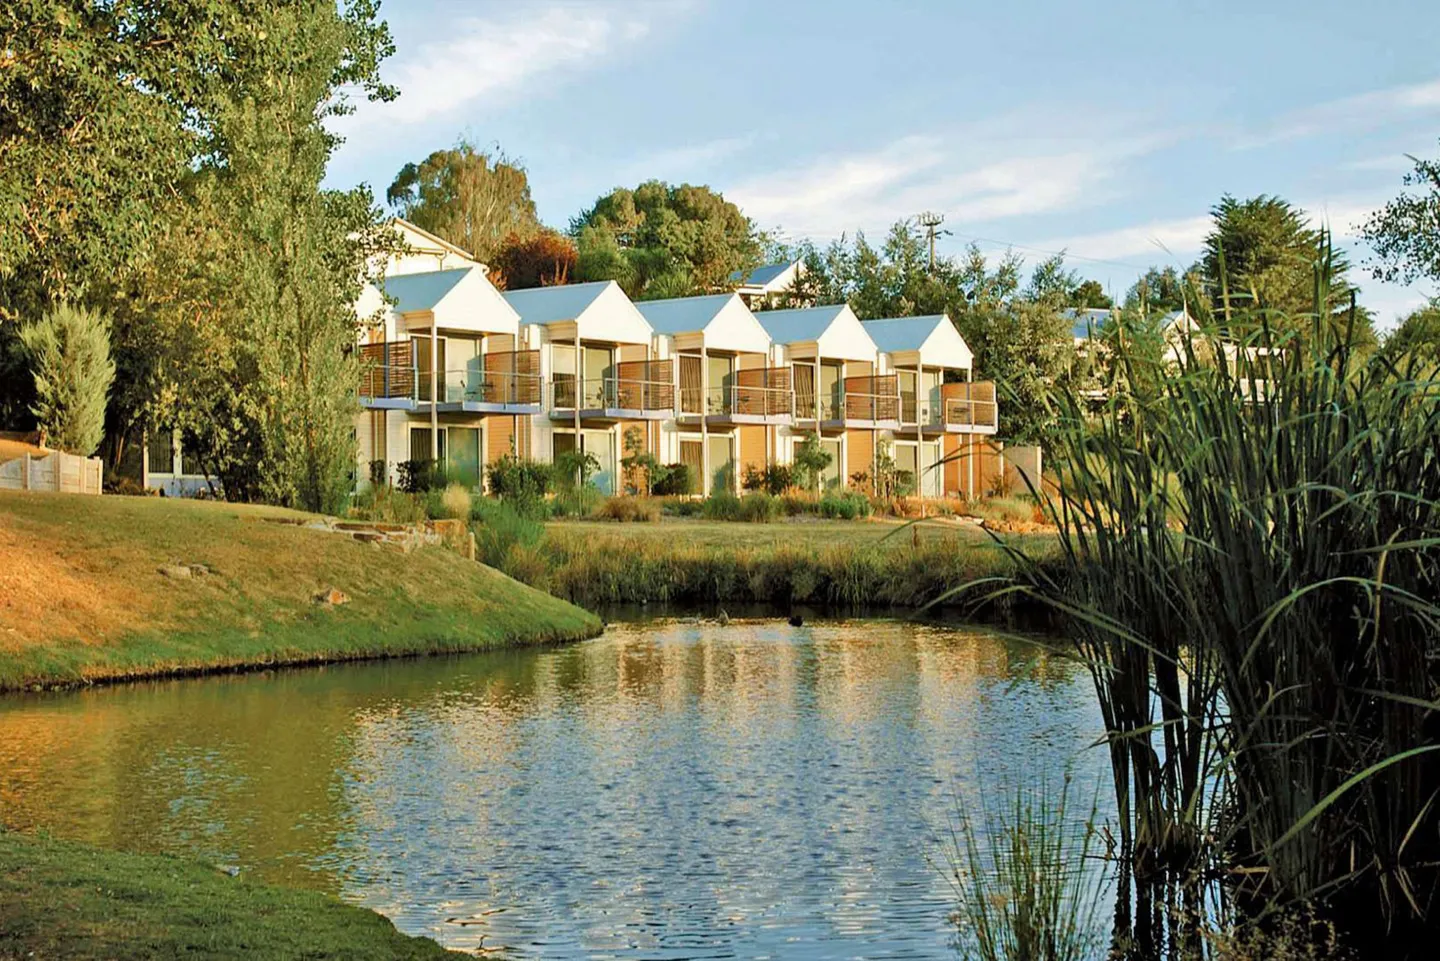 Stay at the Lake House in Daylesford on a luxury tour of Victoria